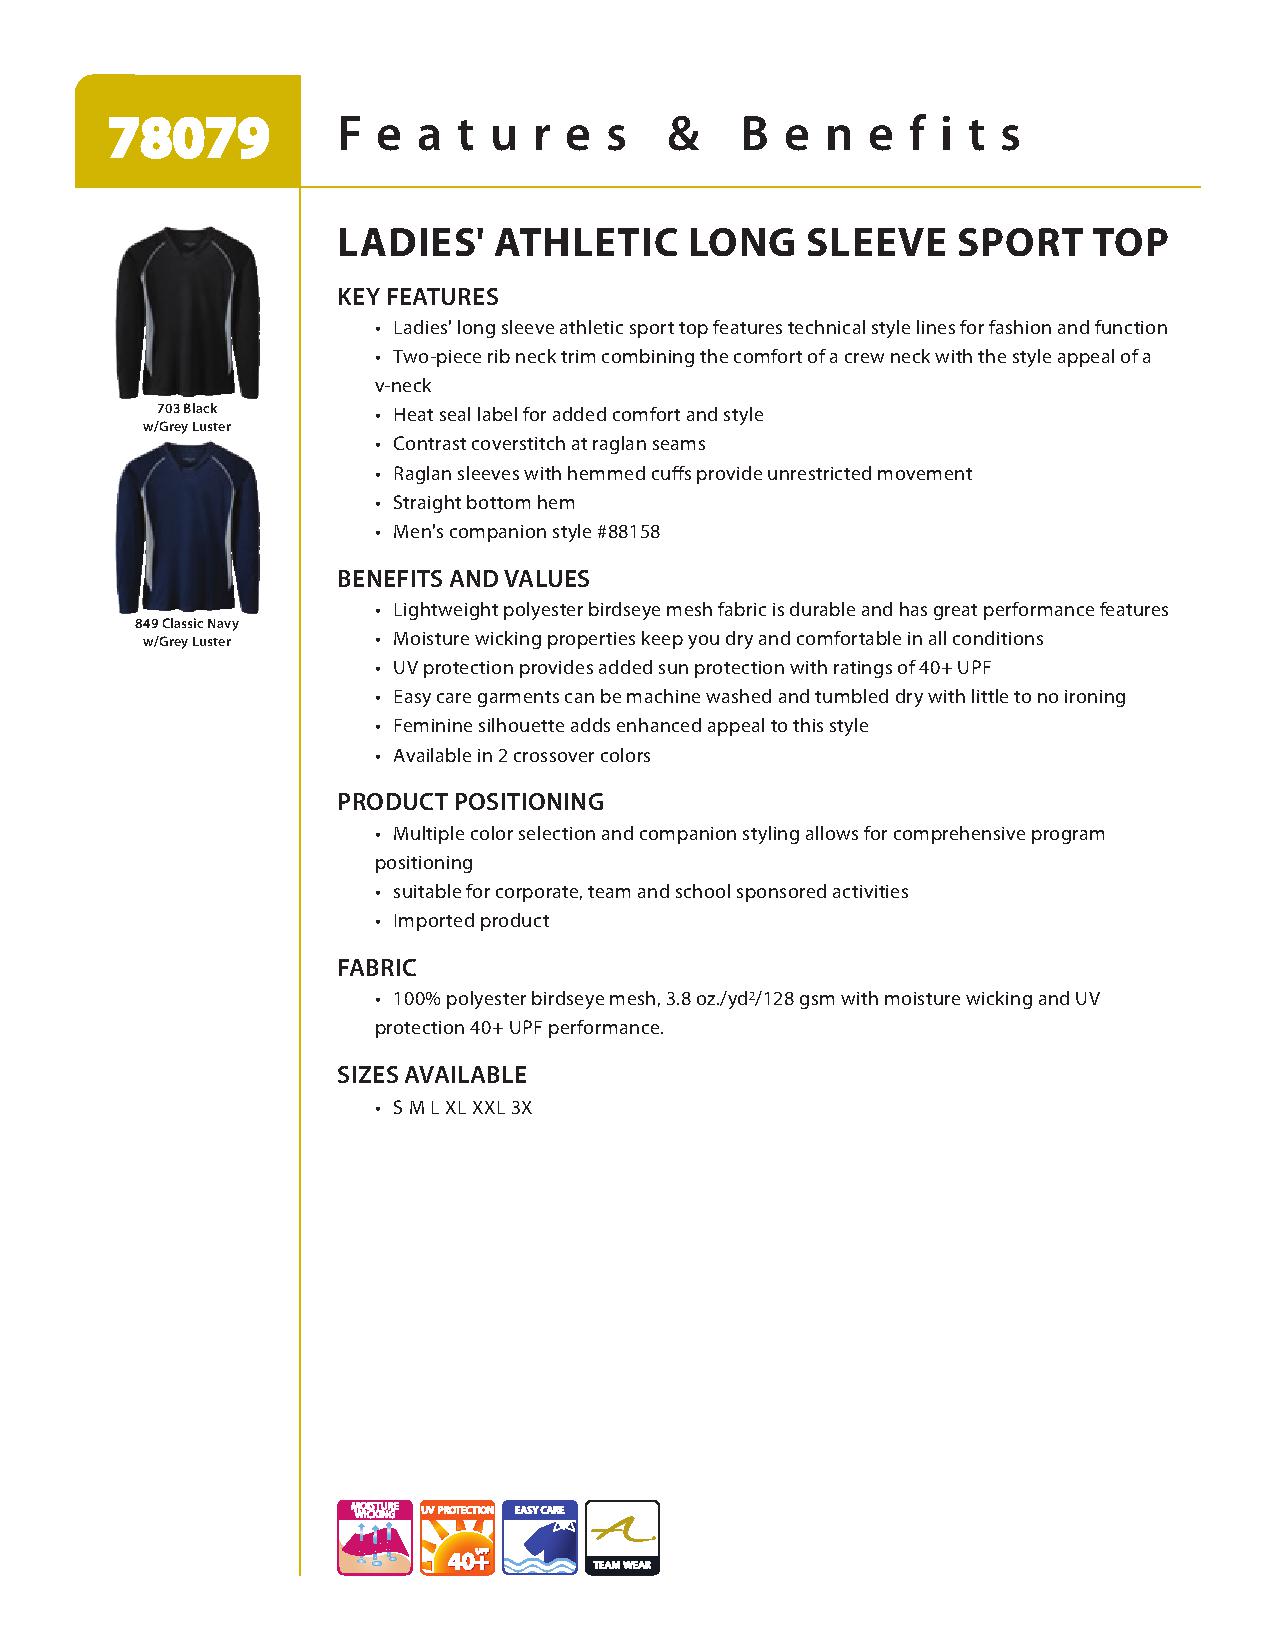 Ash City Lifestyle Performance Tops 78079 - Ladies' Athletic Long Sleeve Sport Top